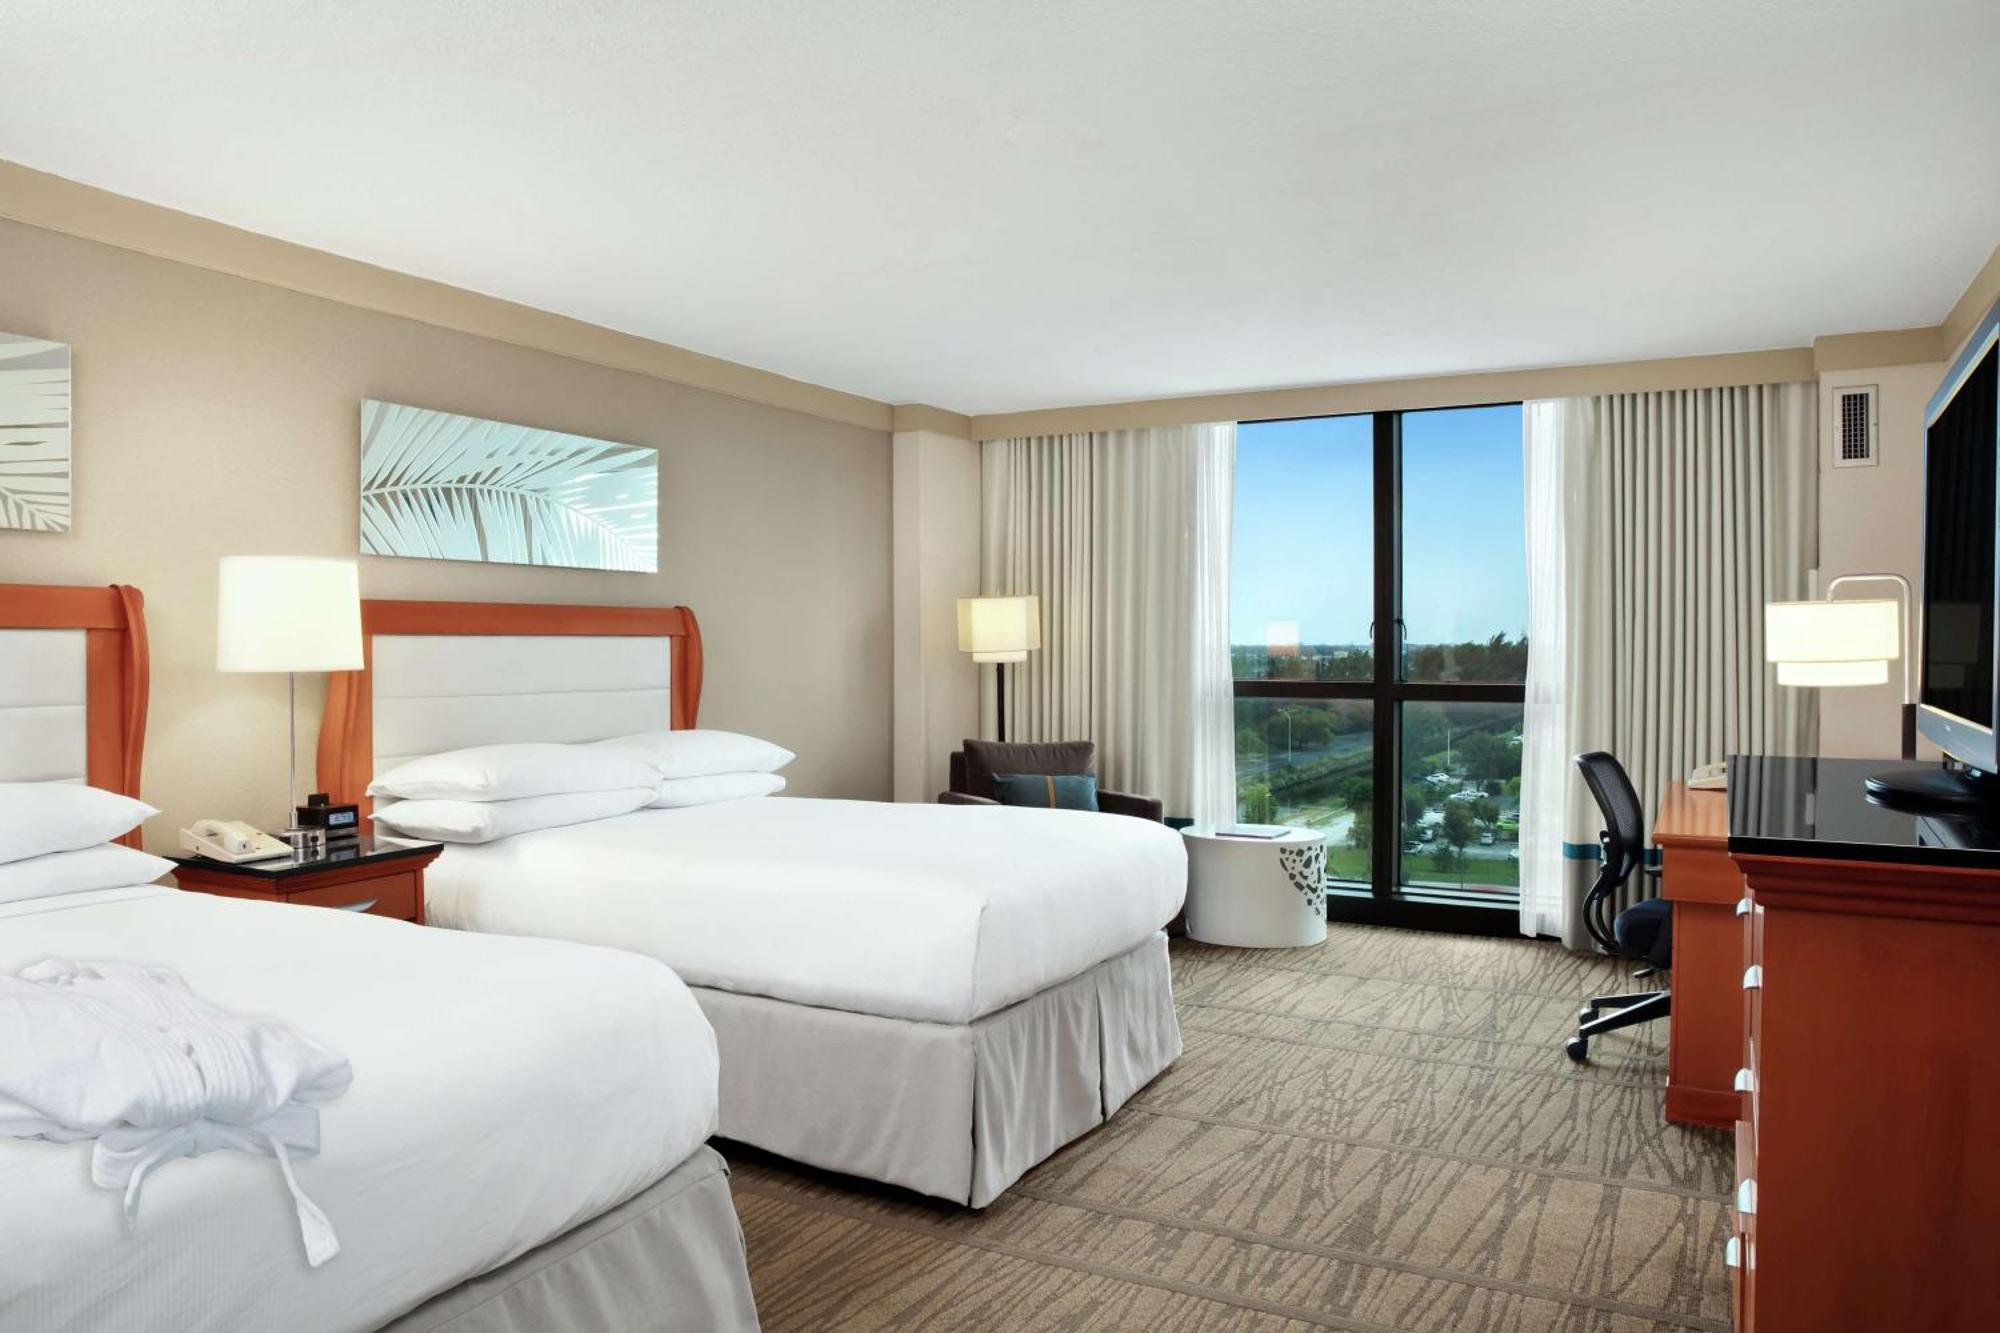 Doubletree By Hilton Hotel Miami Airport & Convention Center Bagian luar foto